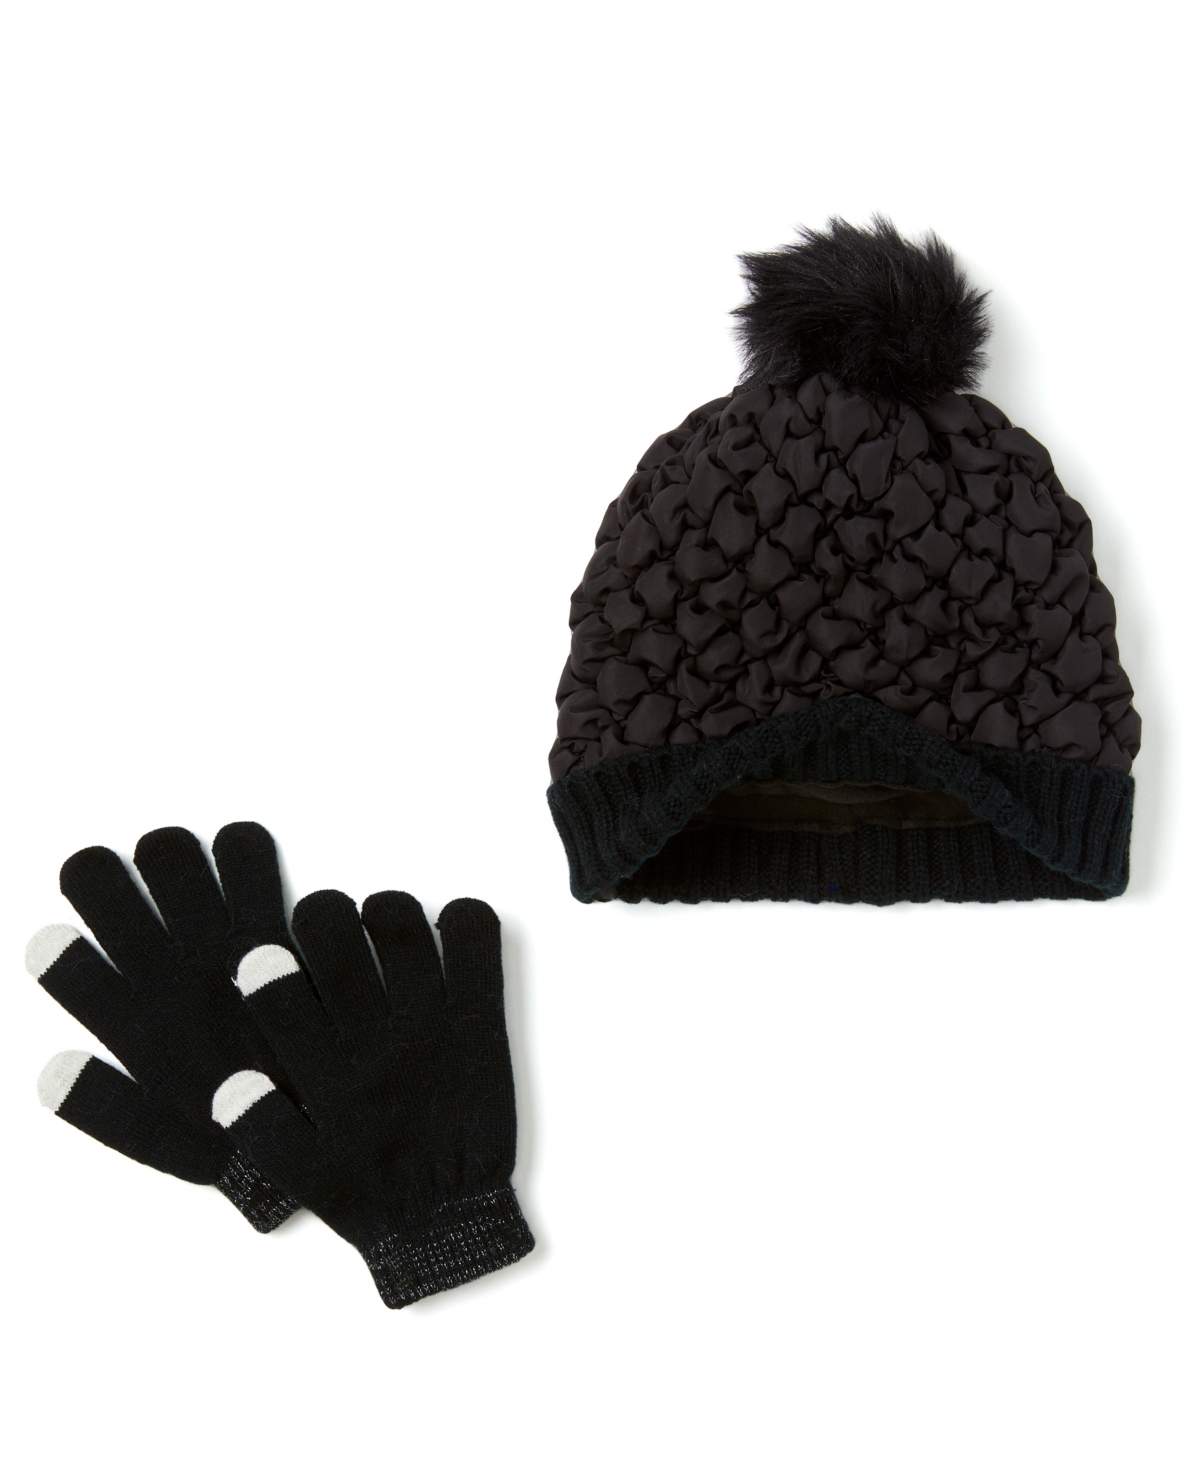 Inmocean Quilted Hat And Glove Set, 2 Piece In Black